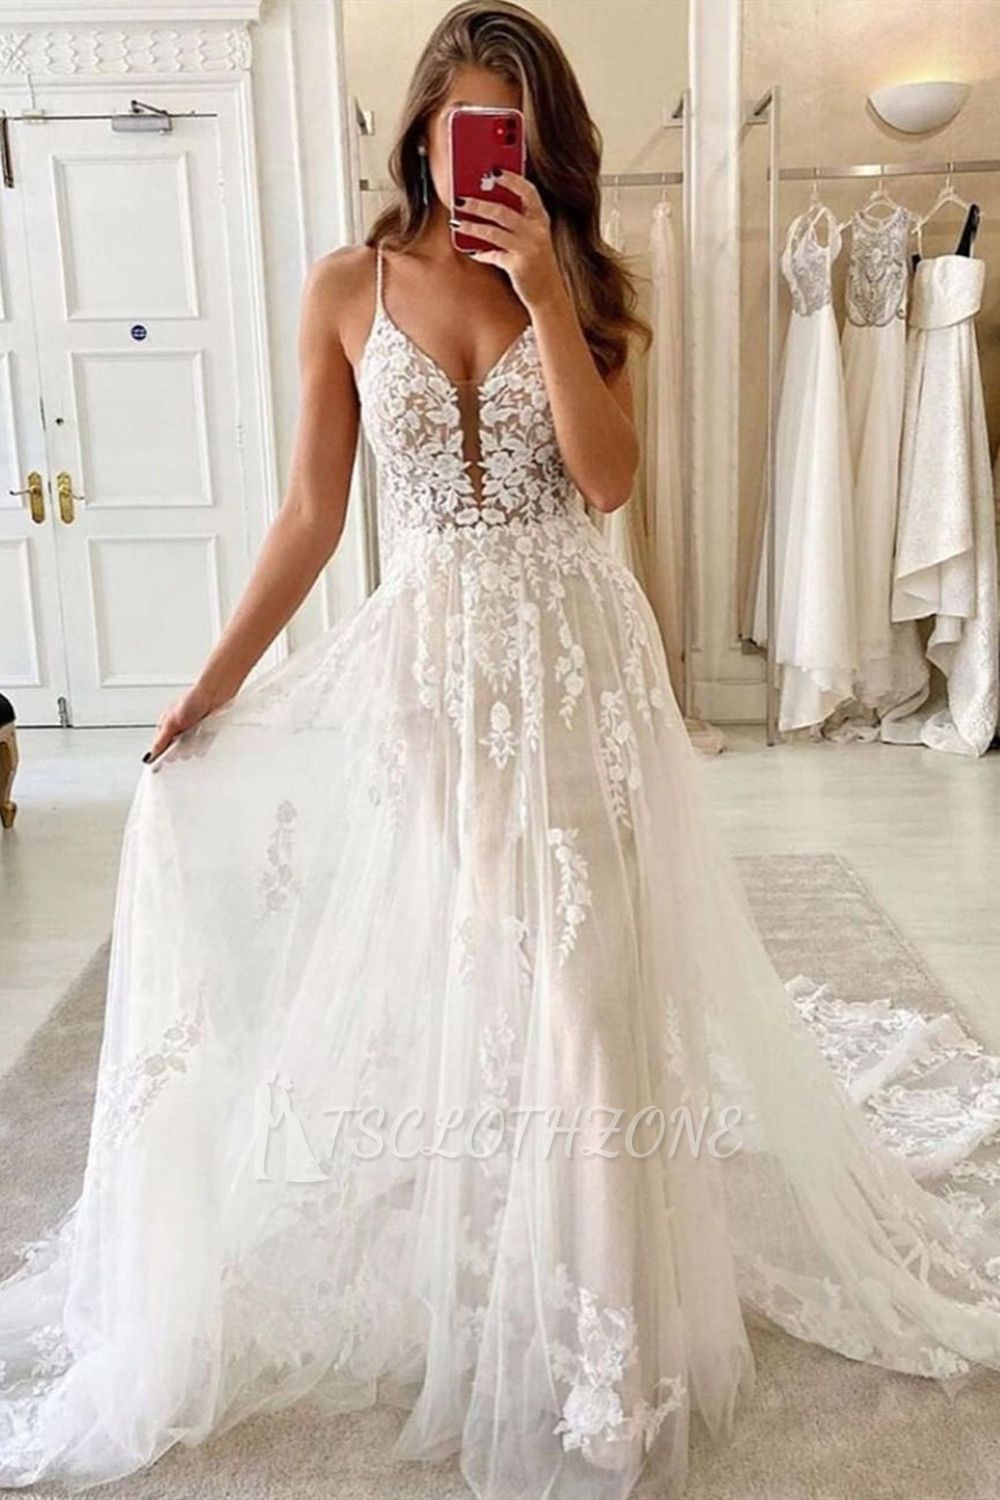 Romantic Floral Appliques Wedding Dress Sleeveless Tulle Mermaid Bridal Gown